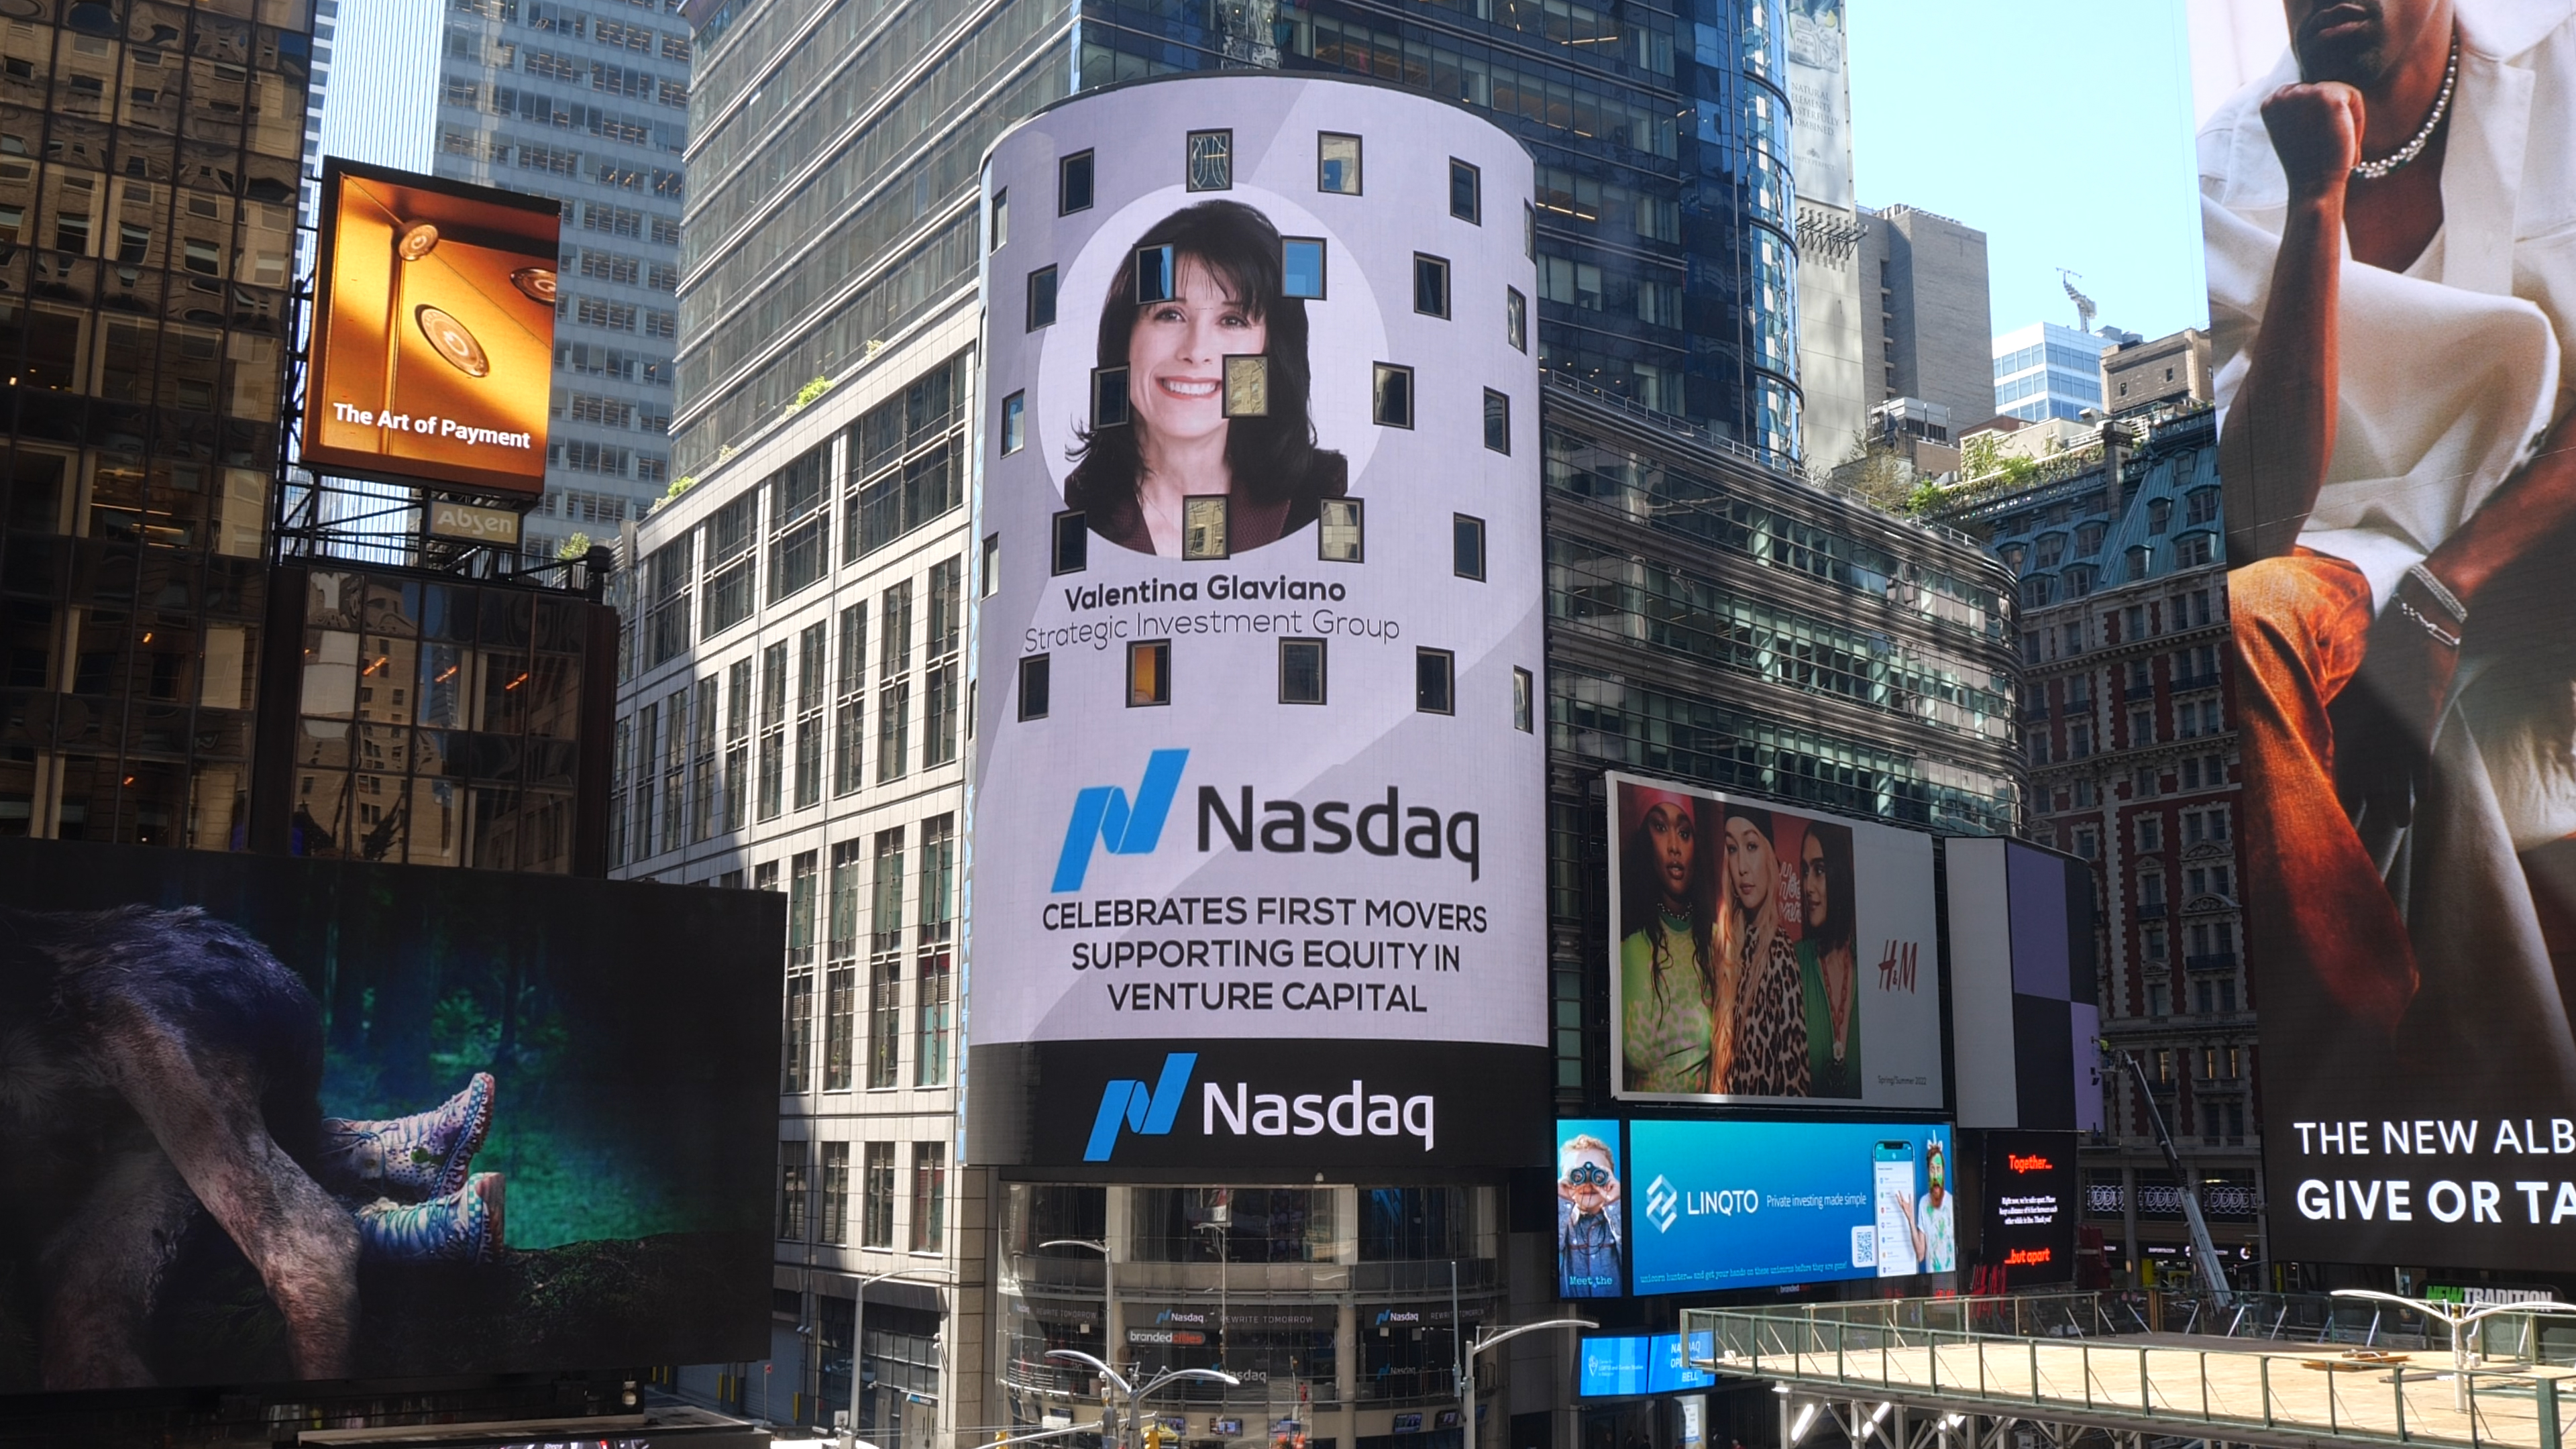 Valentina Glaviano - VEP image projected on Nasdaq's building in Time Square